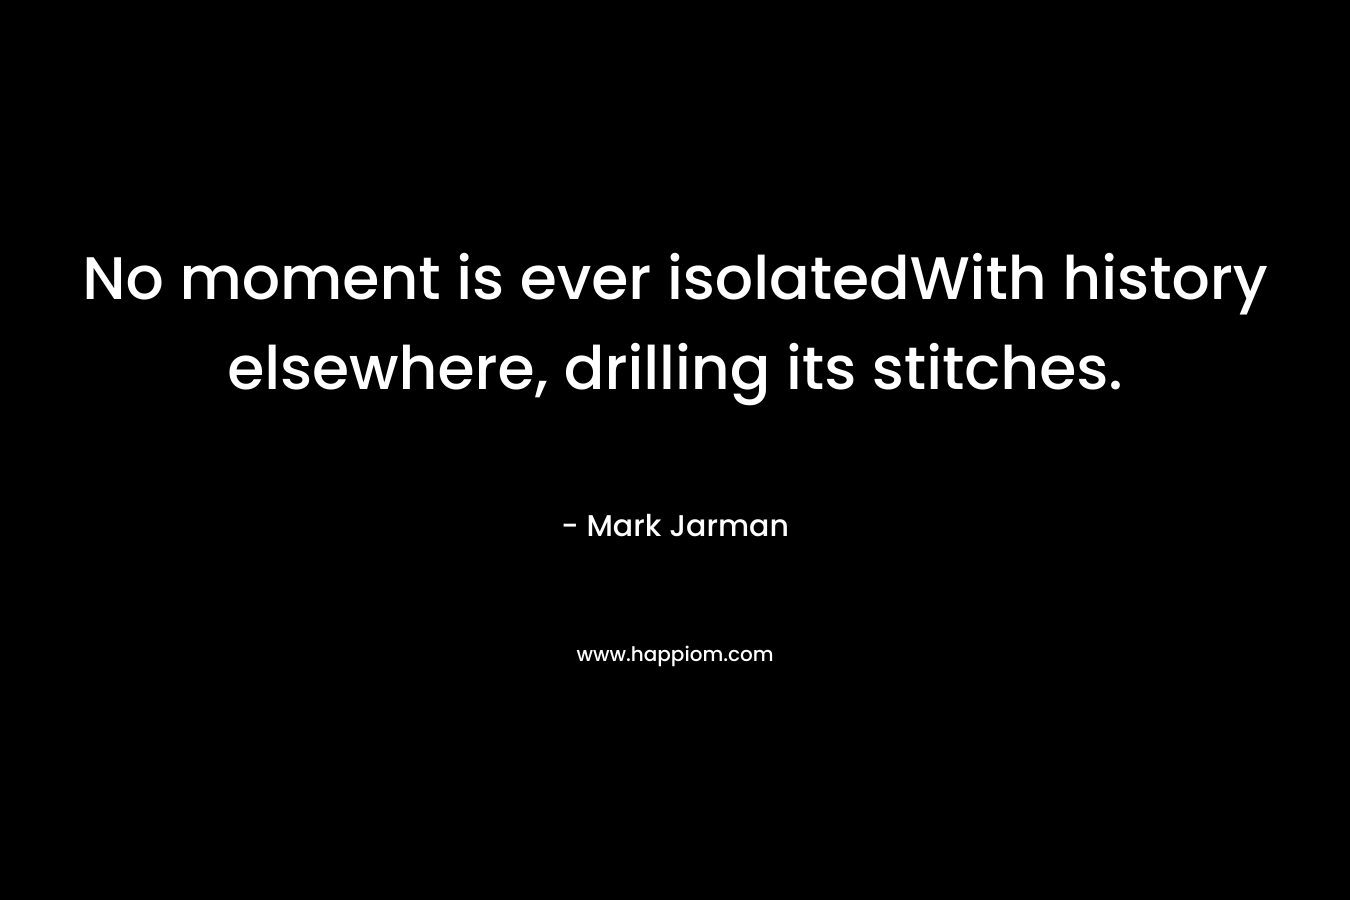 No moment is ever isolatedWith history elsewhere, drilling its stitches.